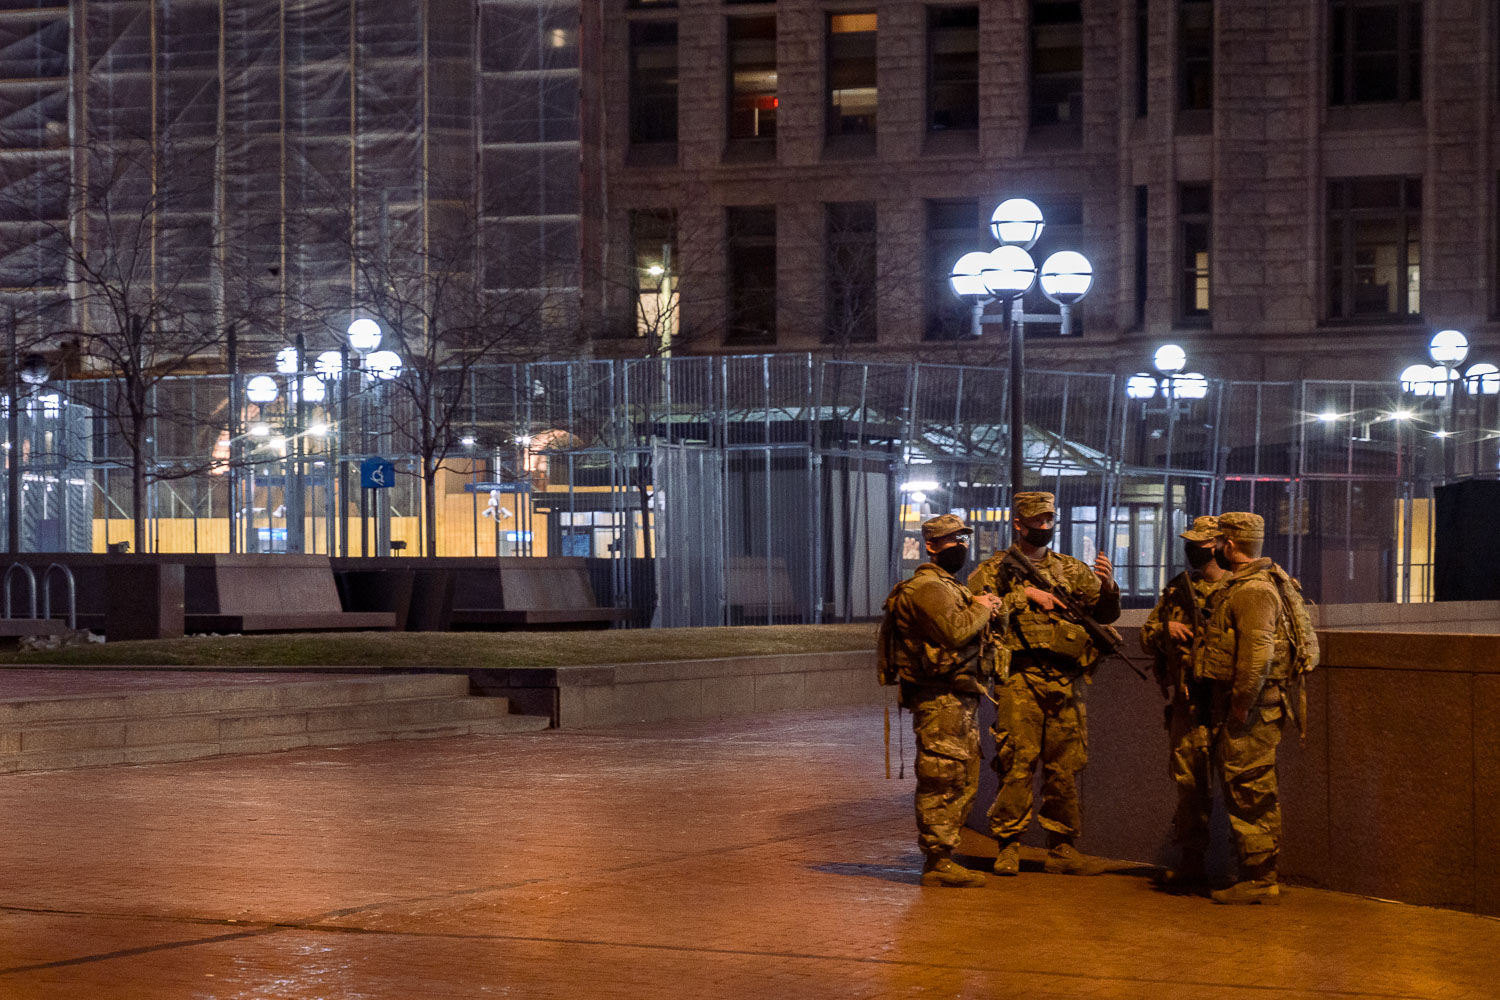 The Minnesota National guard outside the Hennepin County Government Center in Minneapolis on March 7th, 2021 during the Derek Chauvin murder trial.